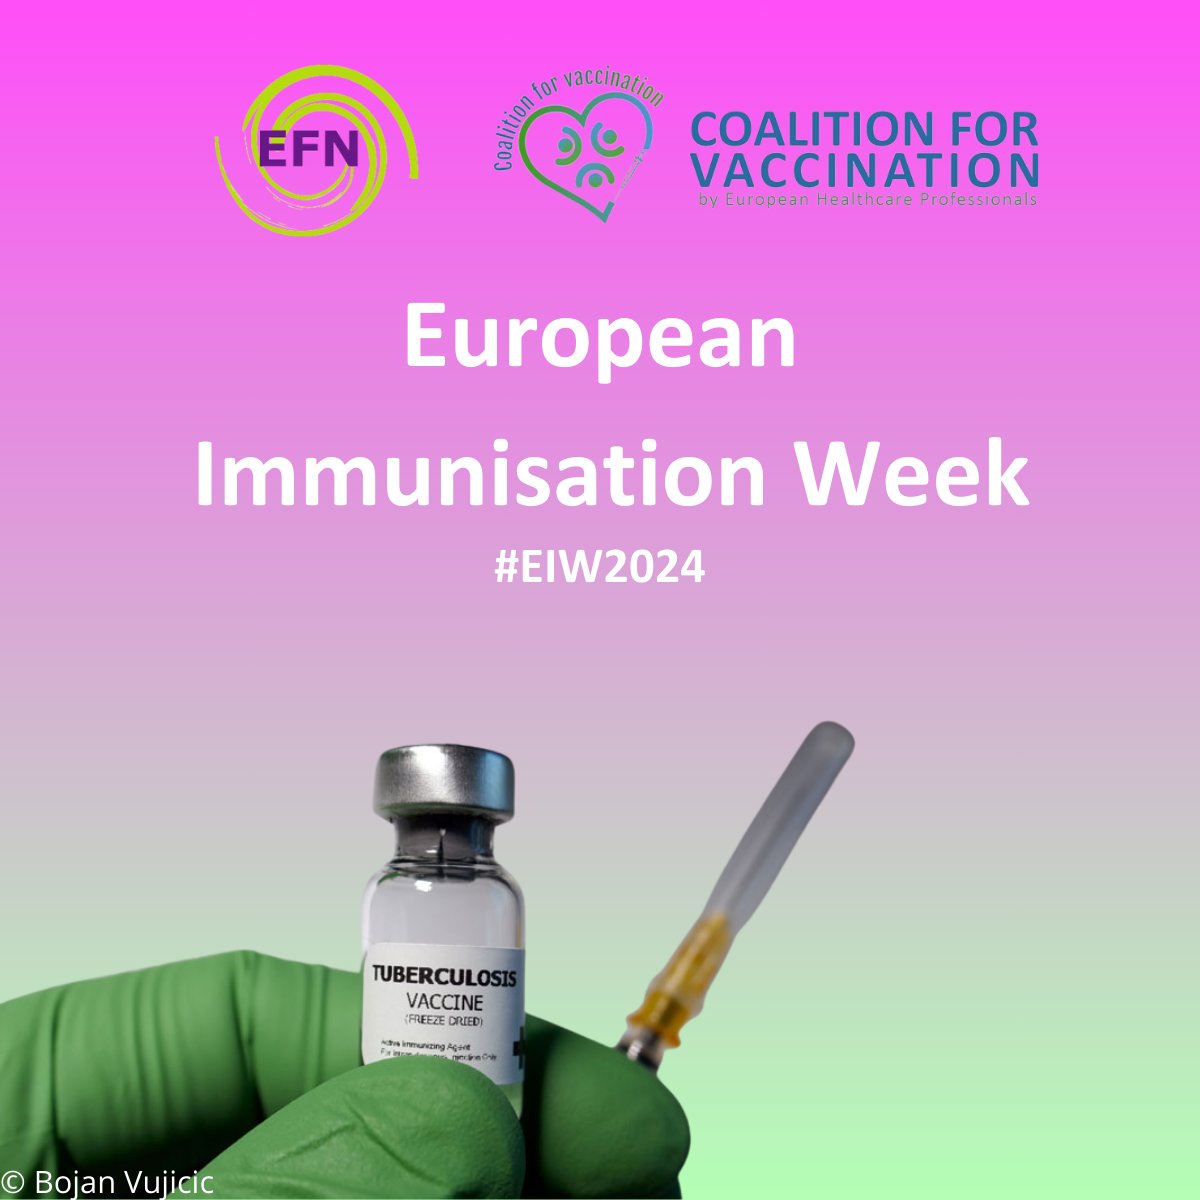 Tuberculosis (TB) was targeted by the #EPI since its inception. Despite progress the incidence of infection and mortality Europe from TB remain high. For this reason, vaccination efforts must continue. #EFN #EIW2024 #GetVaccinated #Nursesforvaccination #Nurses #Prevention